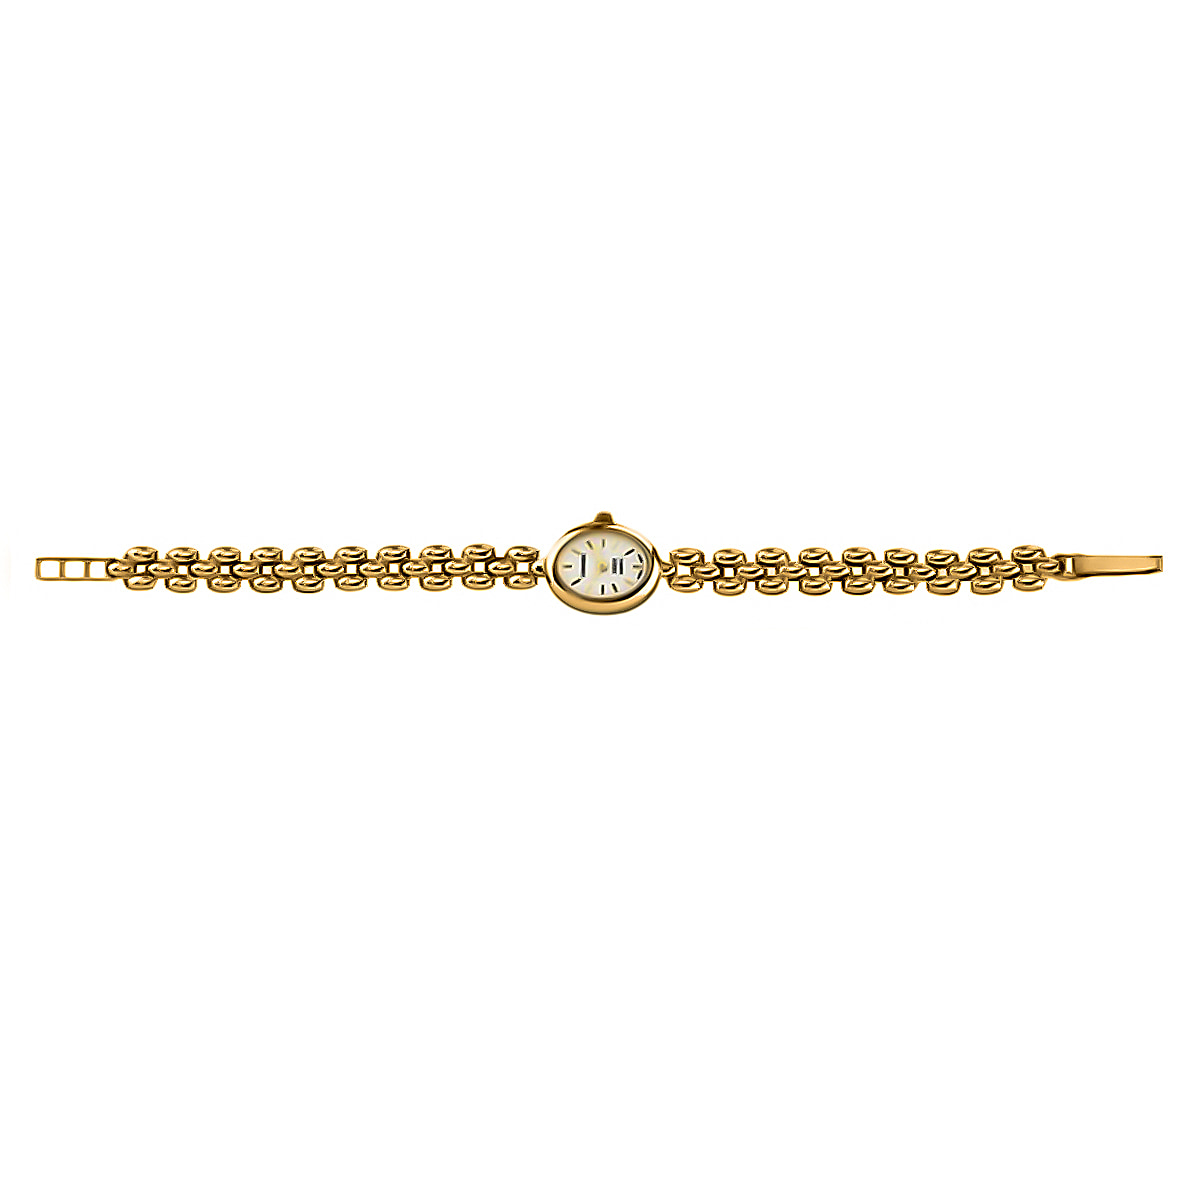 Closeout Deal - Swiss Movement Watch in 9K Yellow Gold Panther Link Bracelet. Gold wt 9.13 Gms